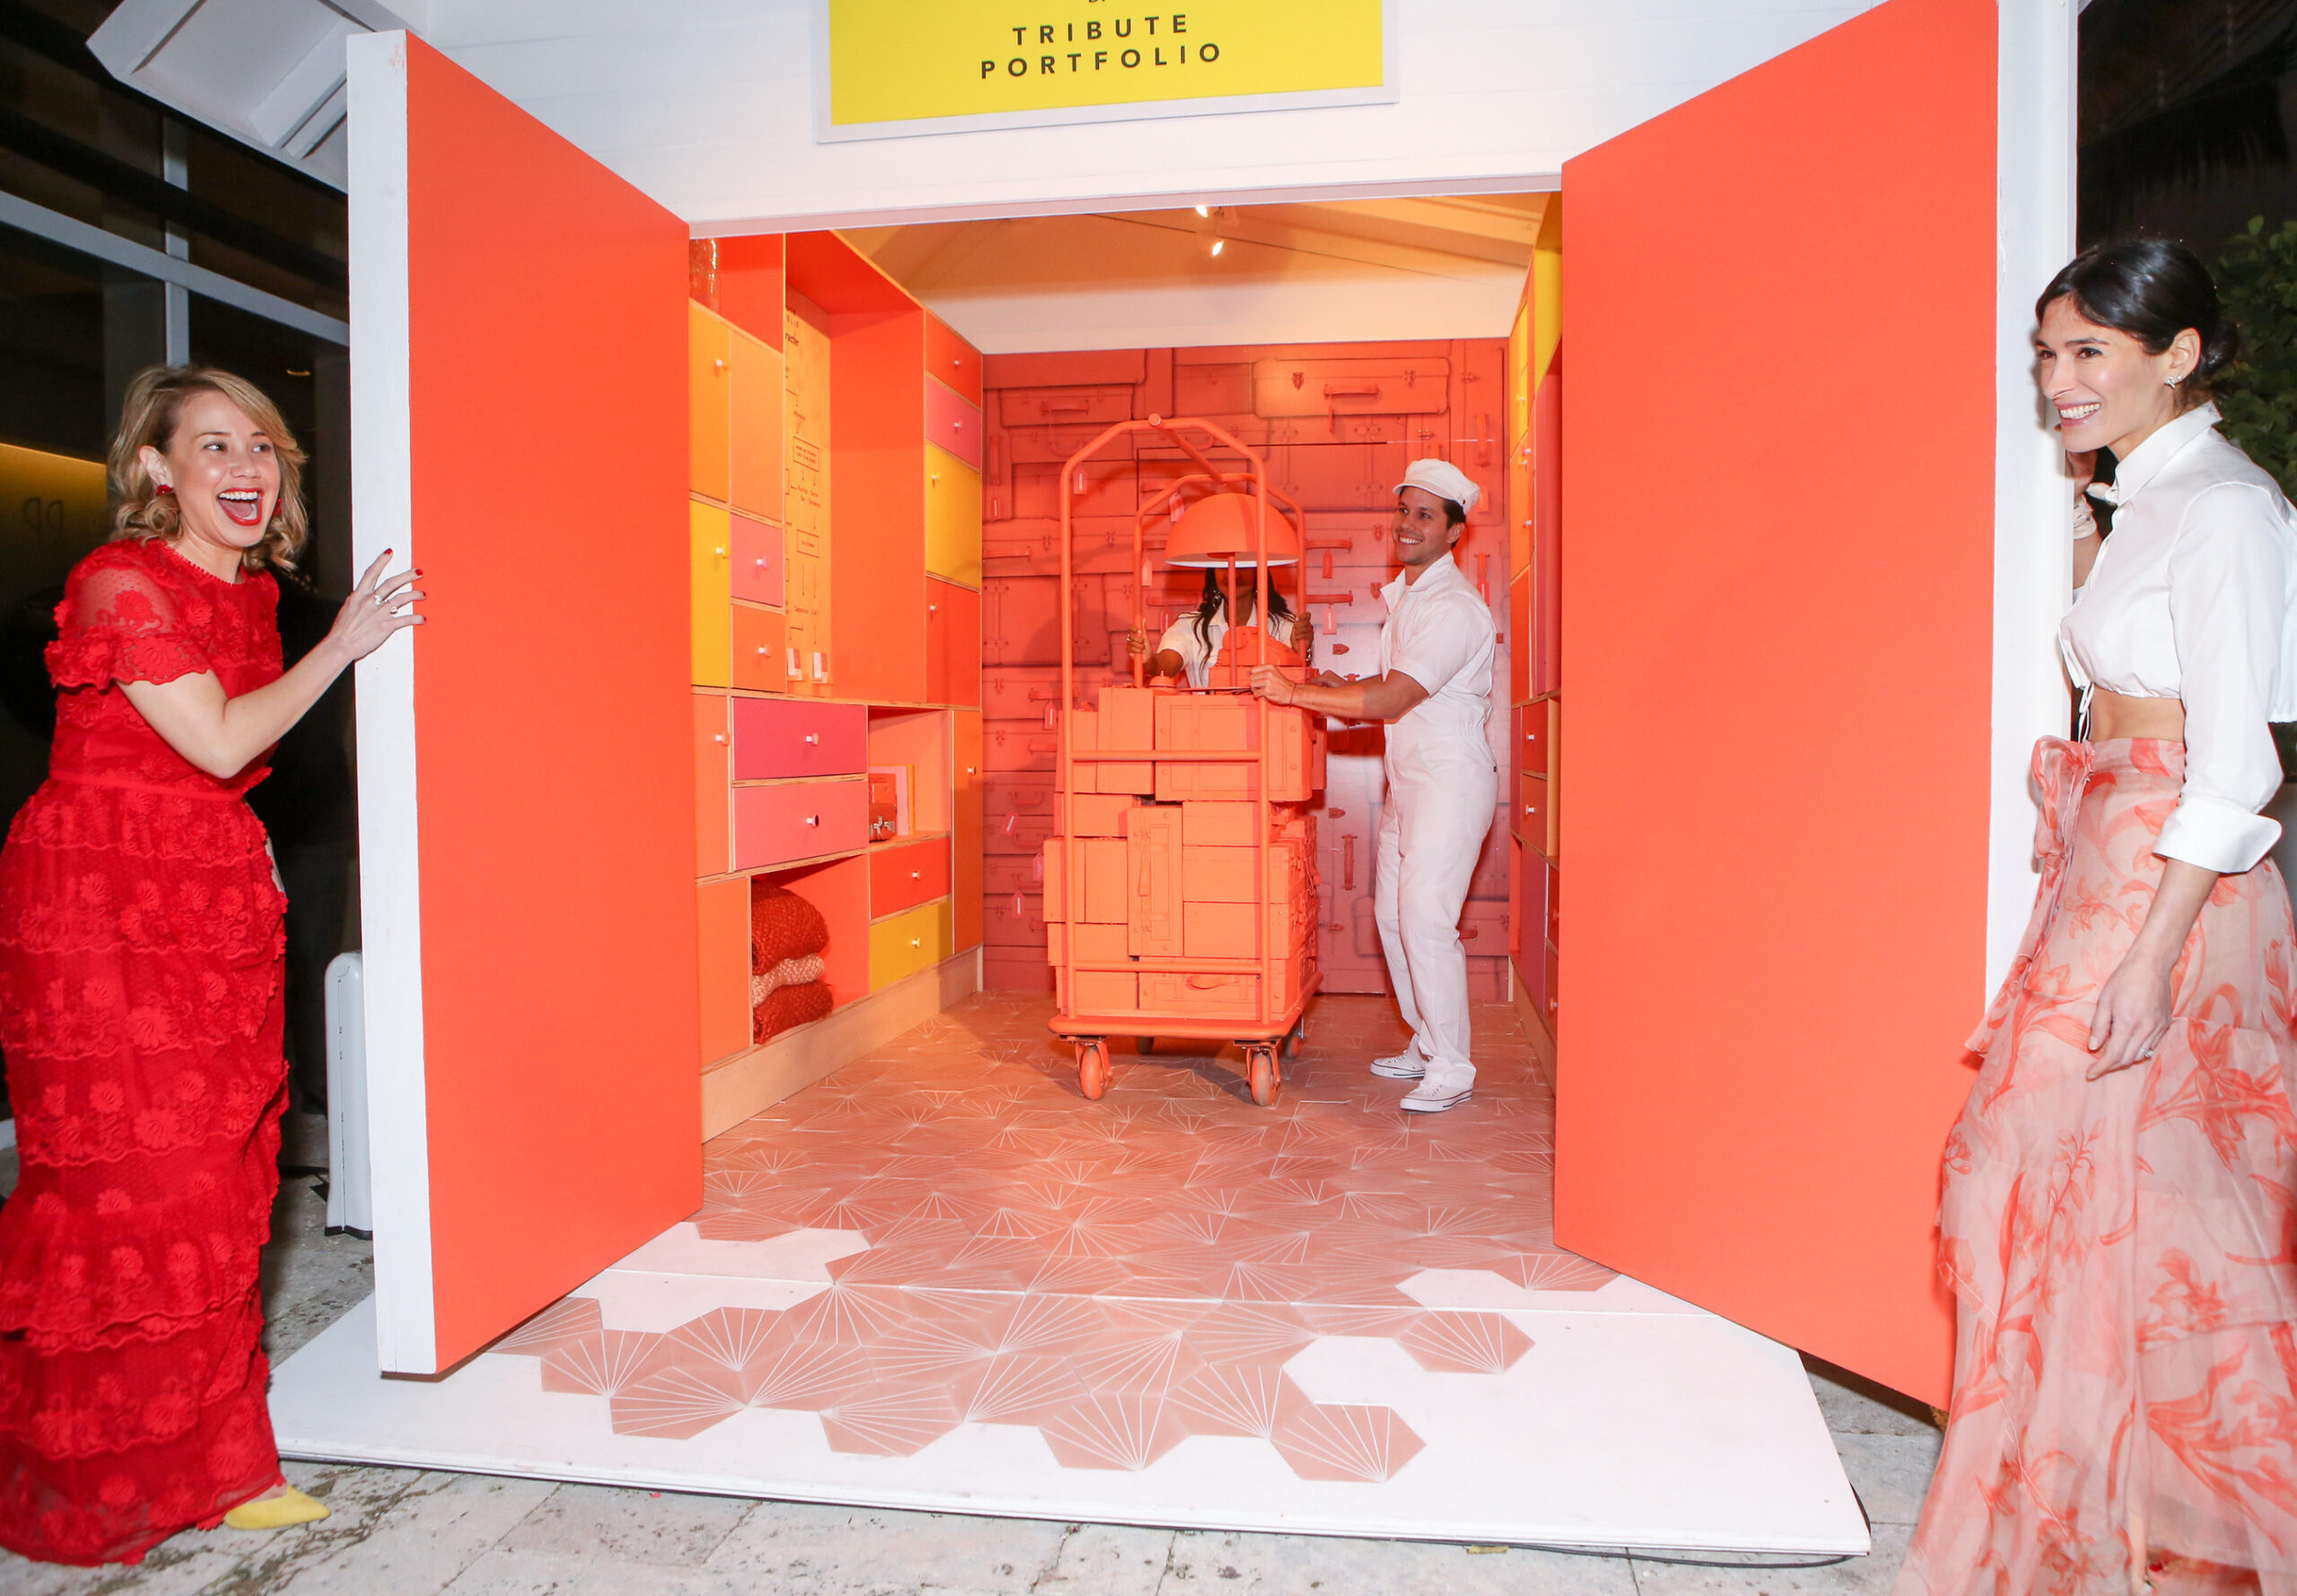 Athena Calderone, interior designer and founder of EyeSwoon, and Amanda Nichols, global brand director for Tribute Portfolio, reveal the 2019 Pantone Color of the Year and the first-of-its-kind Pantone Pantry by Tribute Portfolio.